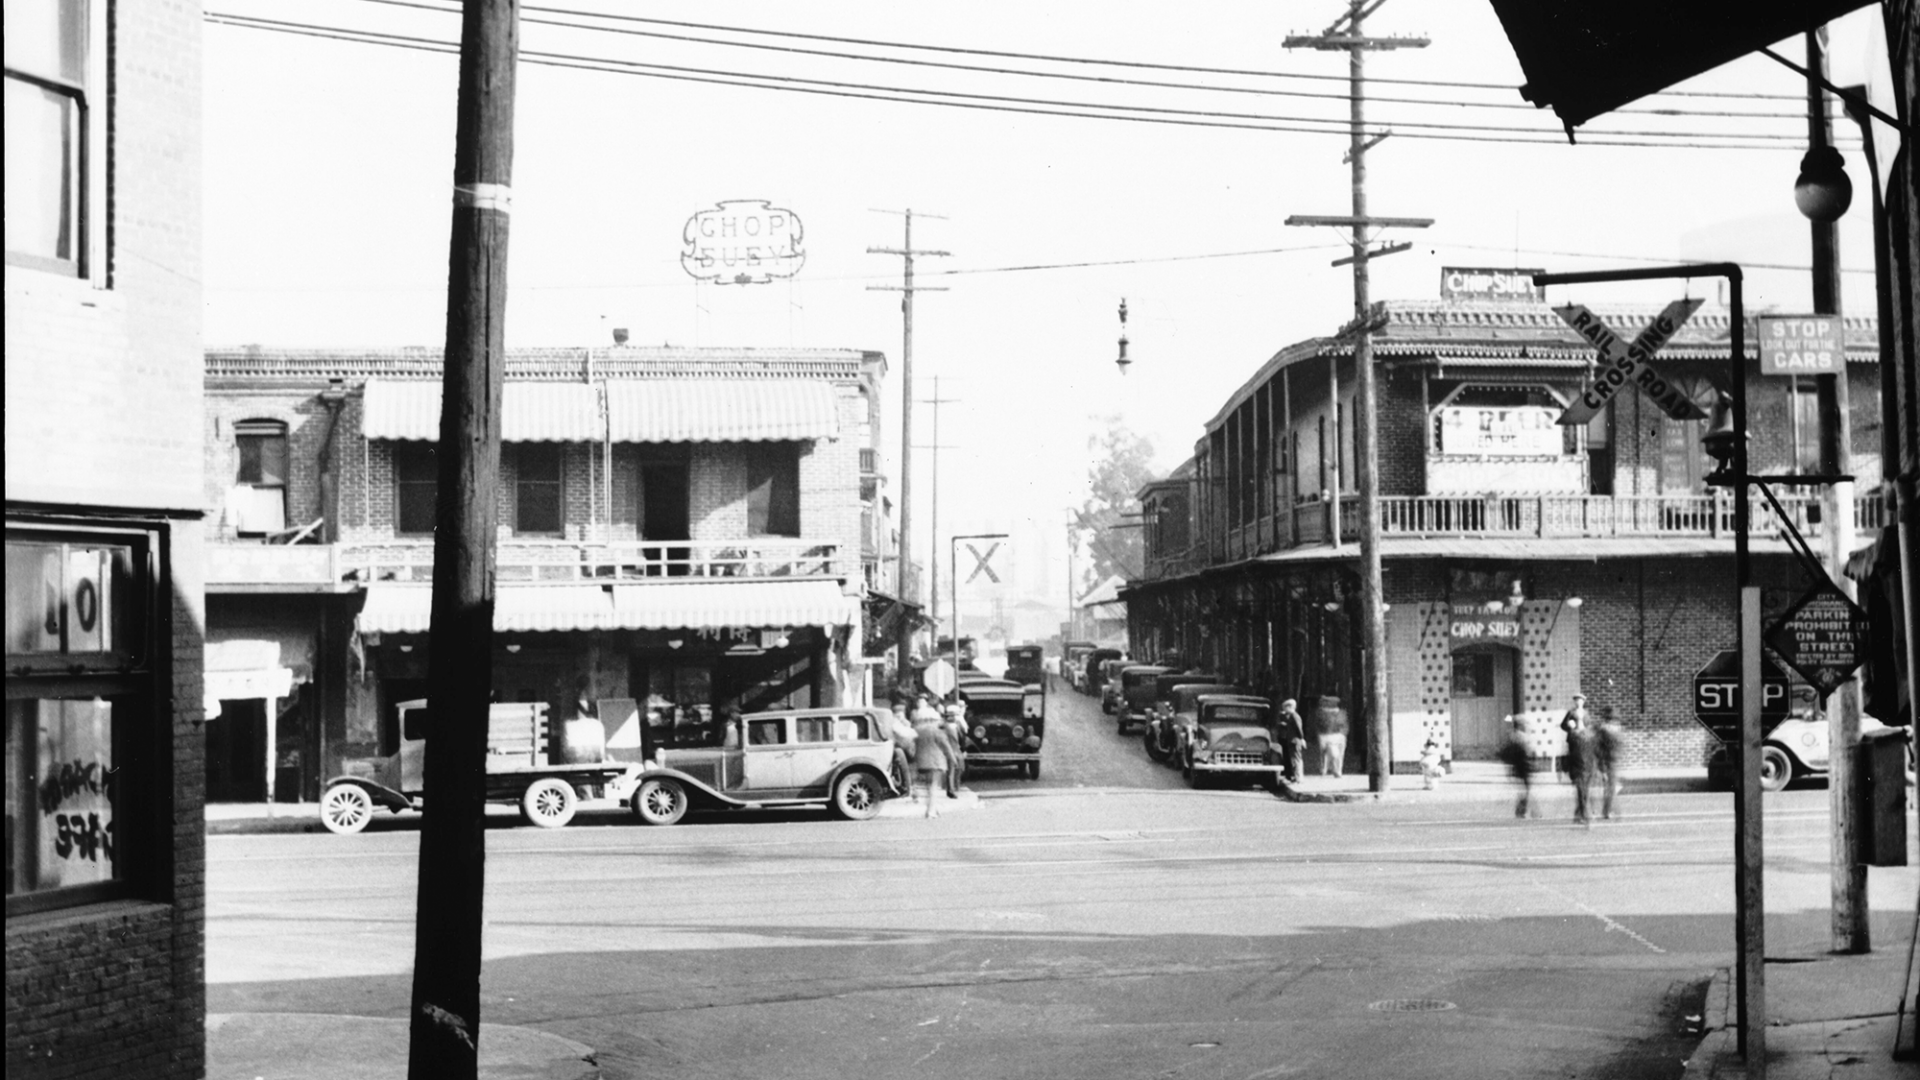 a black-and-white 1935 view of Los Angeles Chinatown, showing people crossing the street and cars parked in front of restaurants and shops